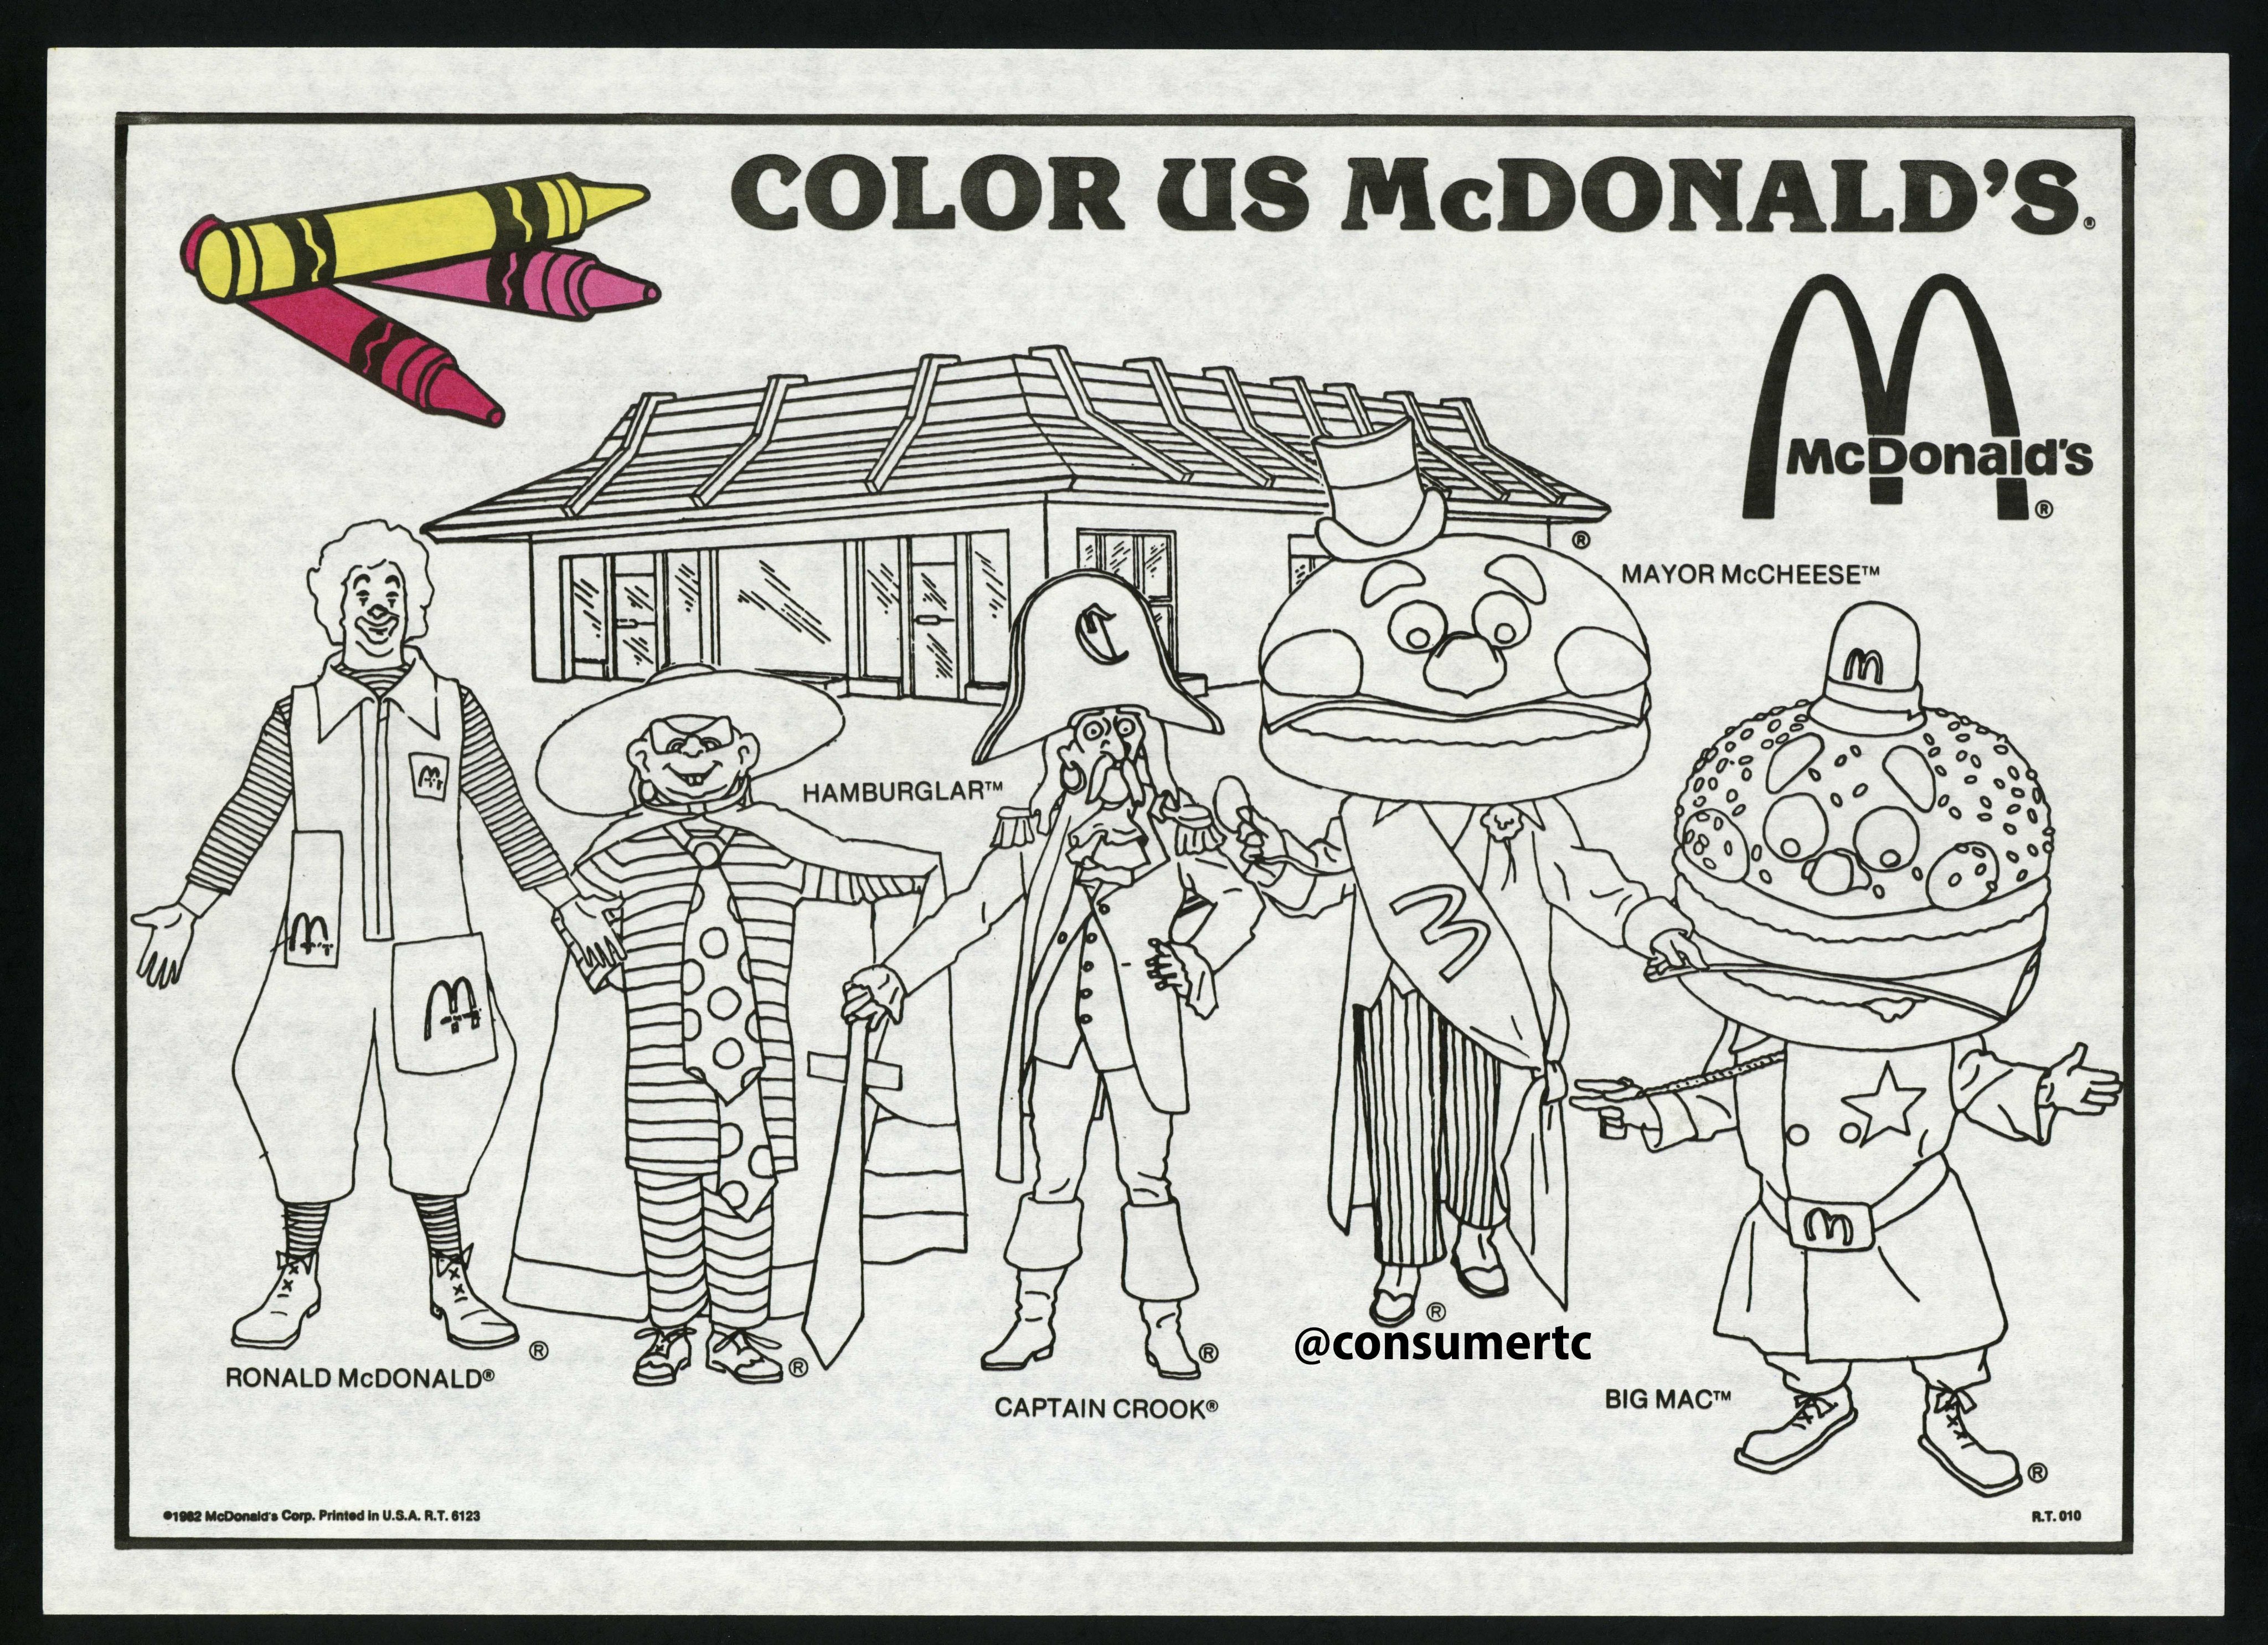 Consumer time capsule on x heres a mcdonalds trayliner with a coloring page of ronald hamburglar captain crook mayor mccheese and officer big mac tell that brooklyn loki takeover mcdonalds they